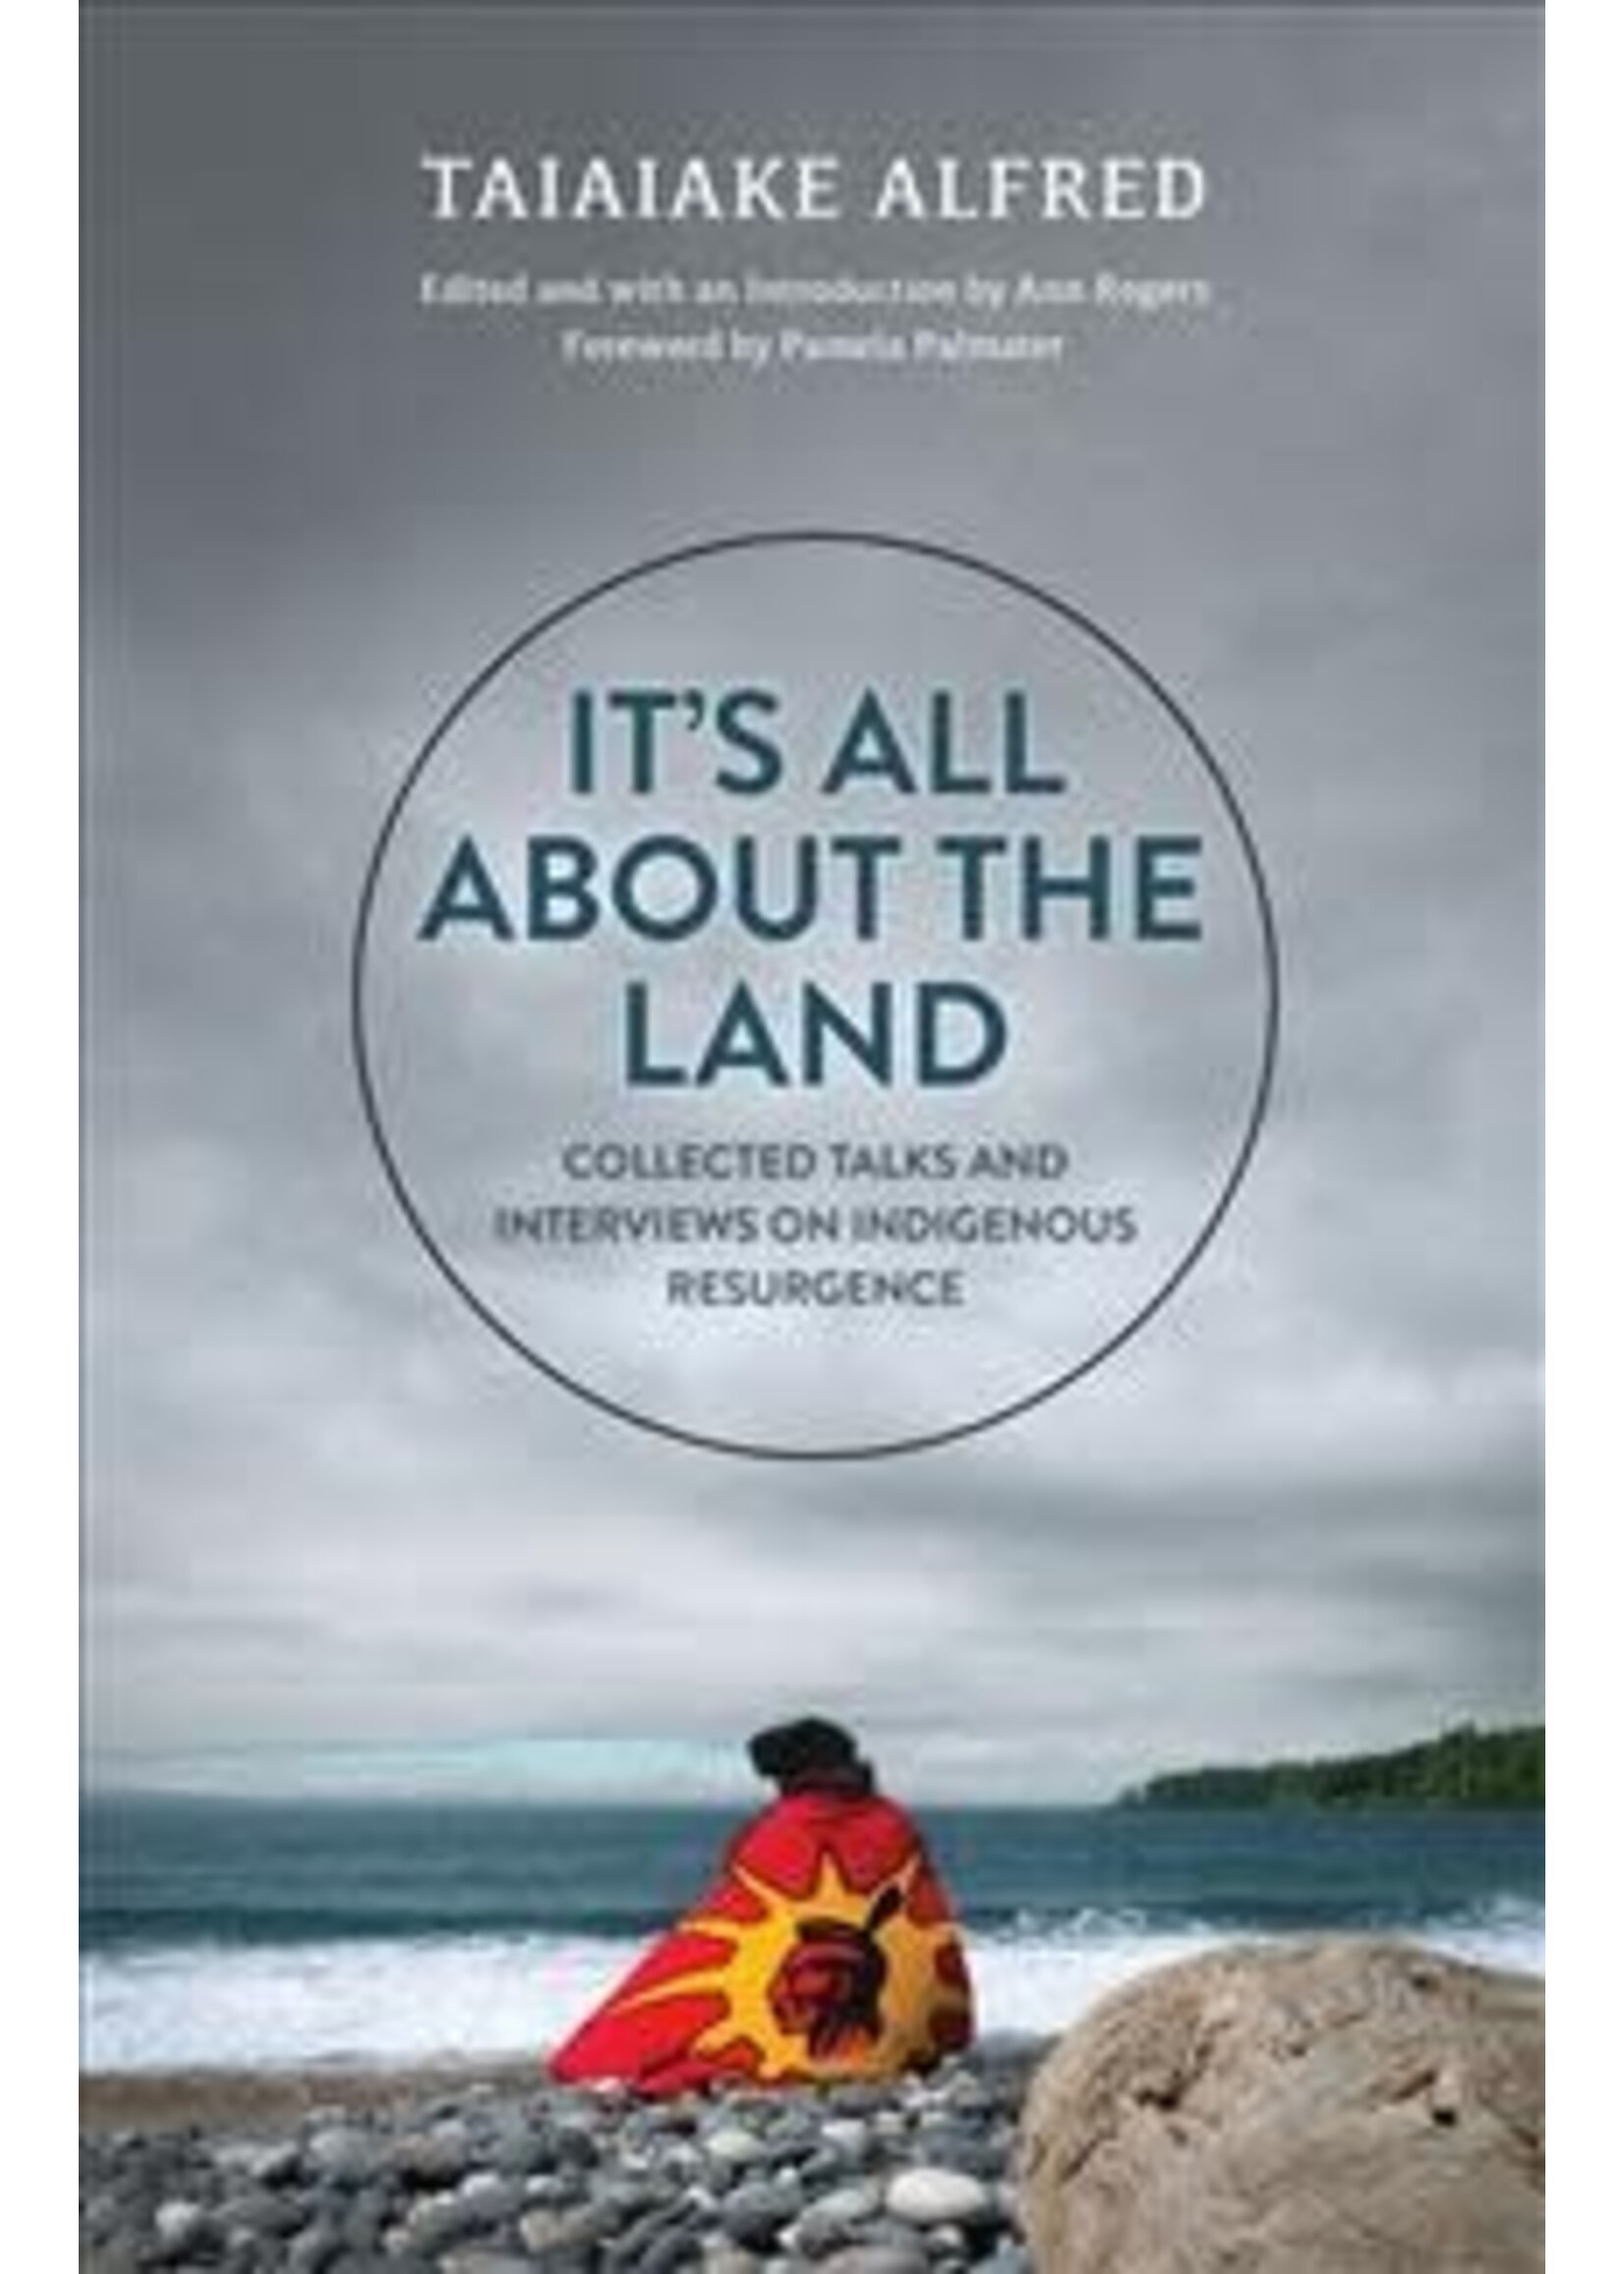 It's All about the Land: Collected Talks and Interviews on Indigenous Resurgence by Taiaiake Alfred, Ann Rogers